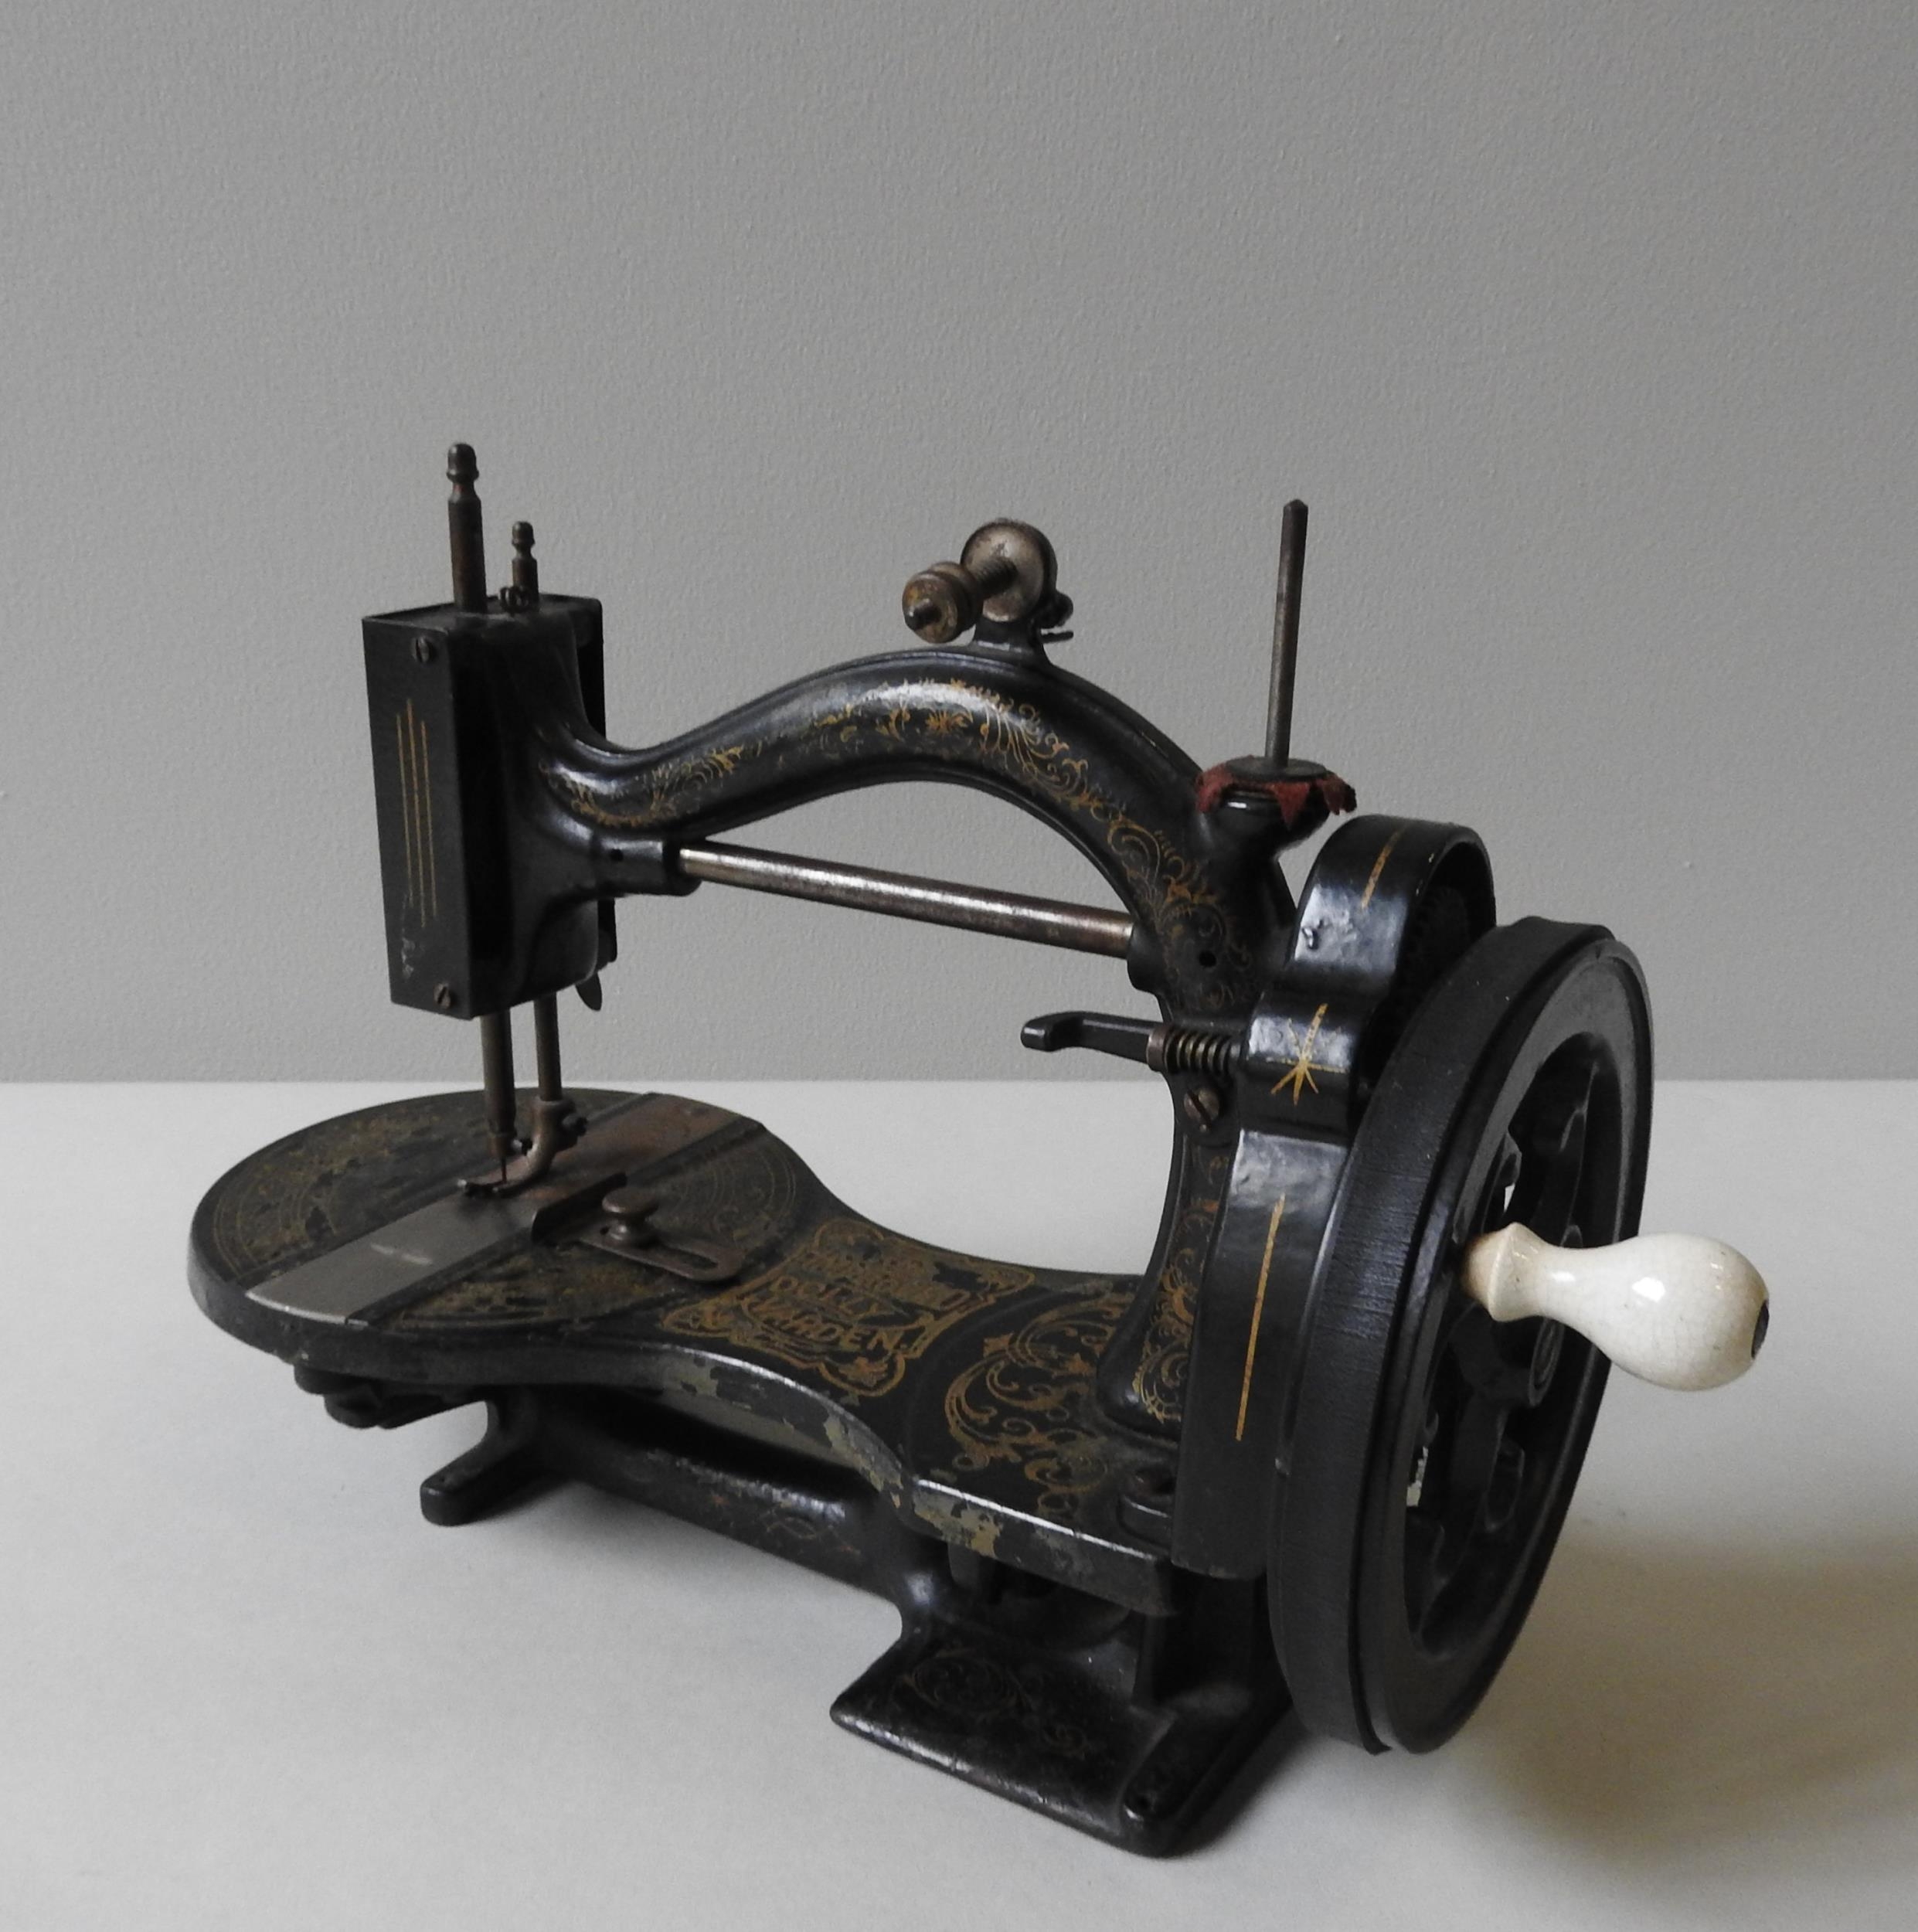 A LATE 19TH CENTURY 'IMPROVED DOLLY VARDEN' SEWING MACHINE, circa 1874, 35 x 23 cm